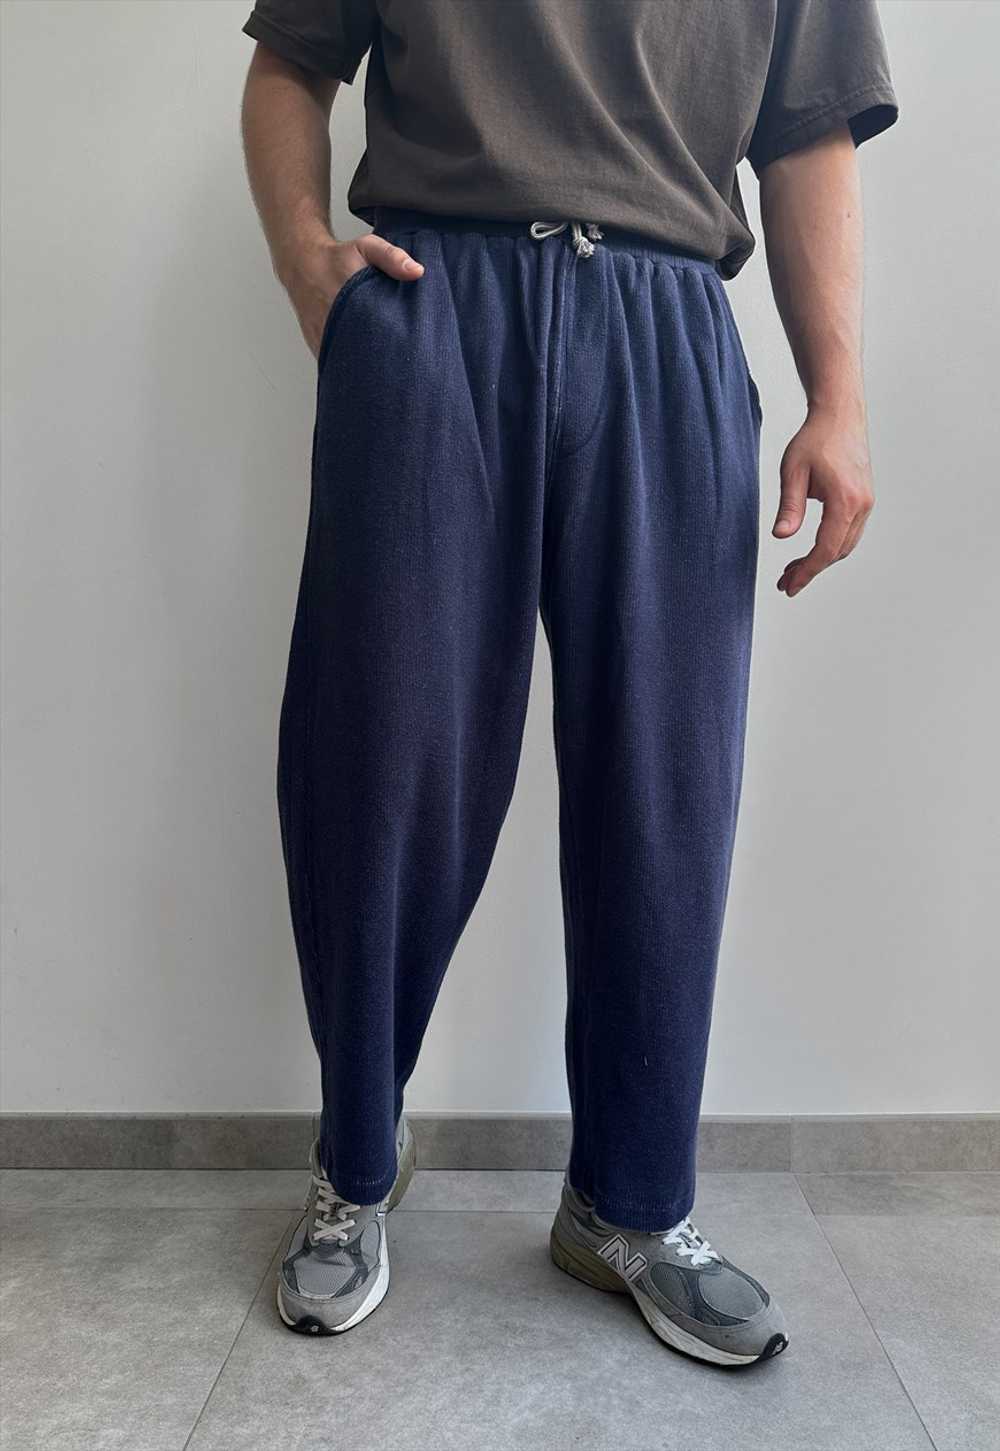 Vintage Adidas 90s Relaxed Fit Sweatpants Size L - image 2